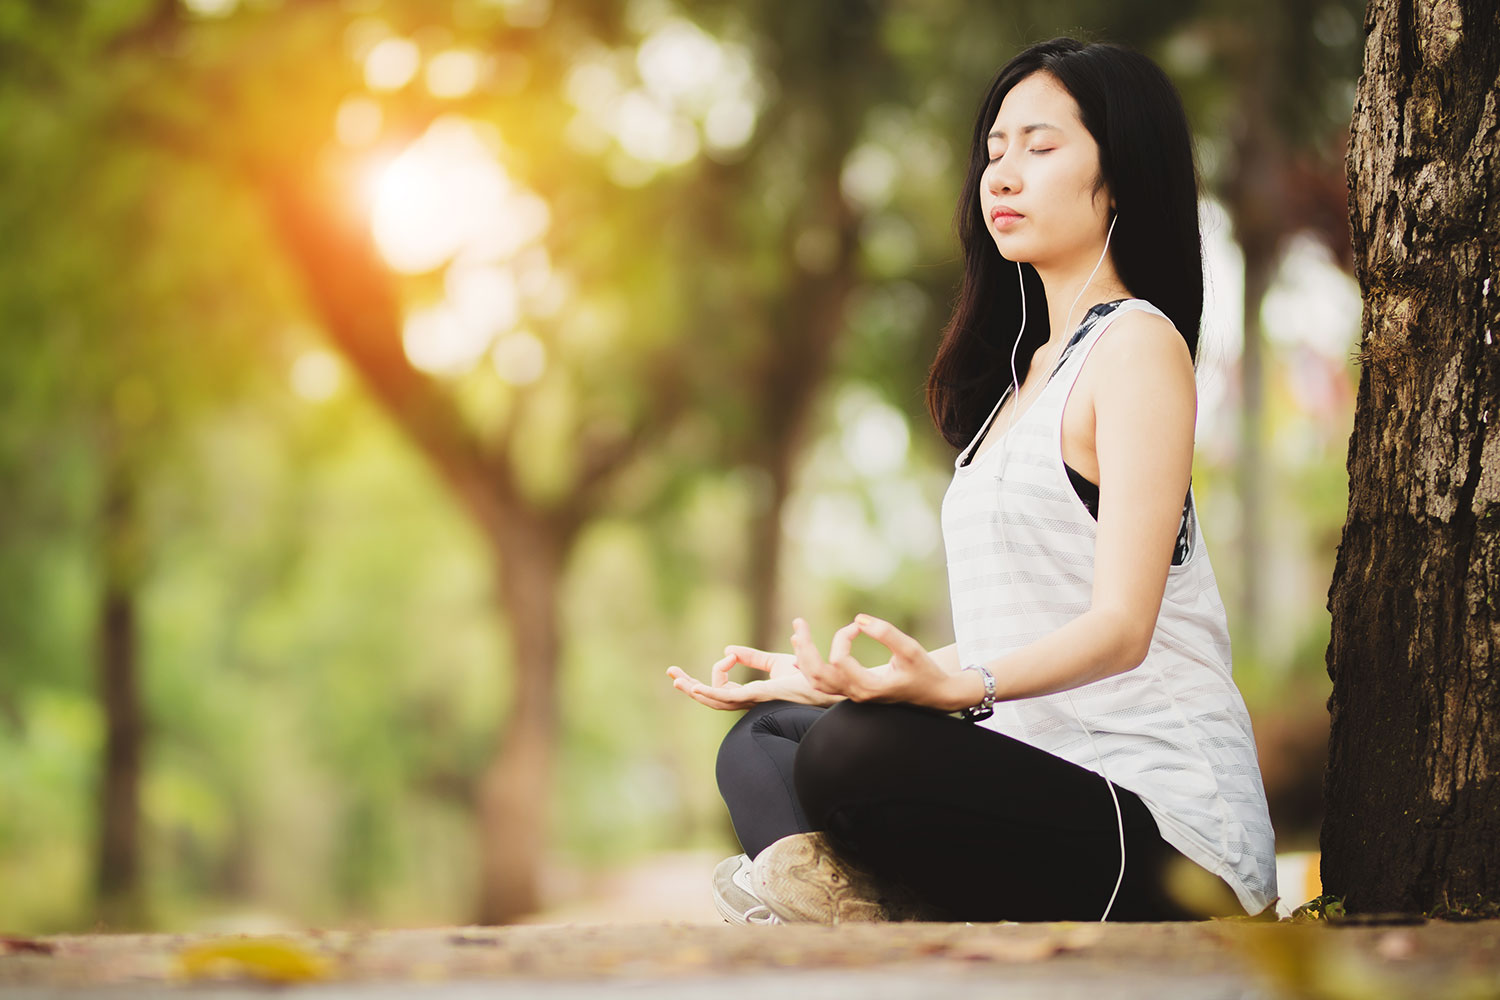 A woman with her earphones while meditating